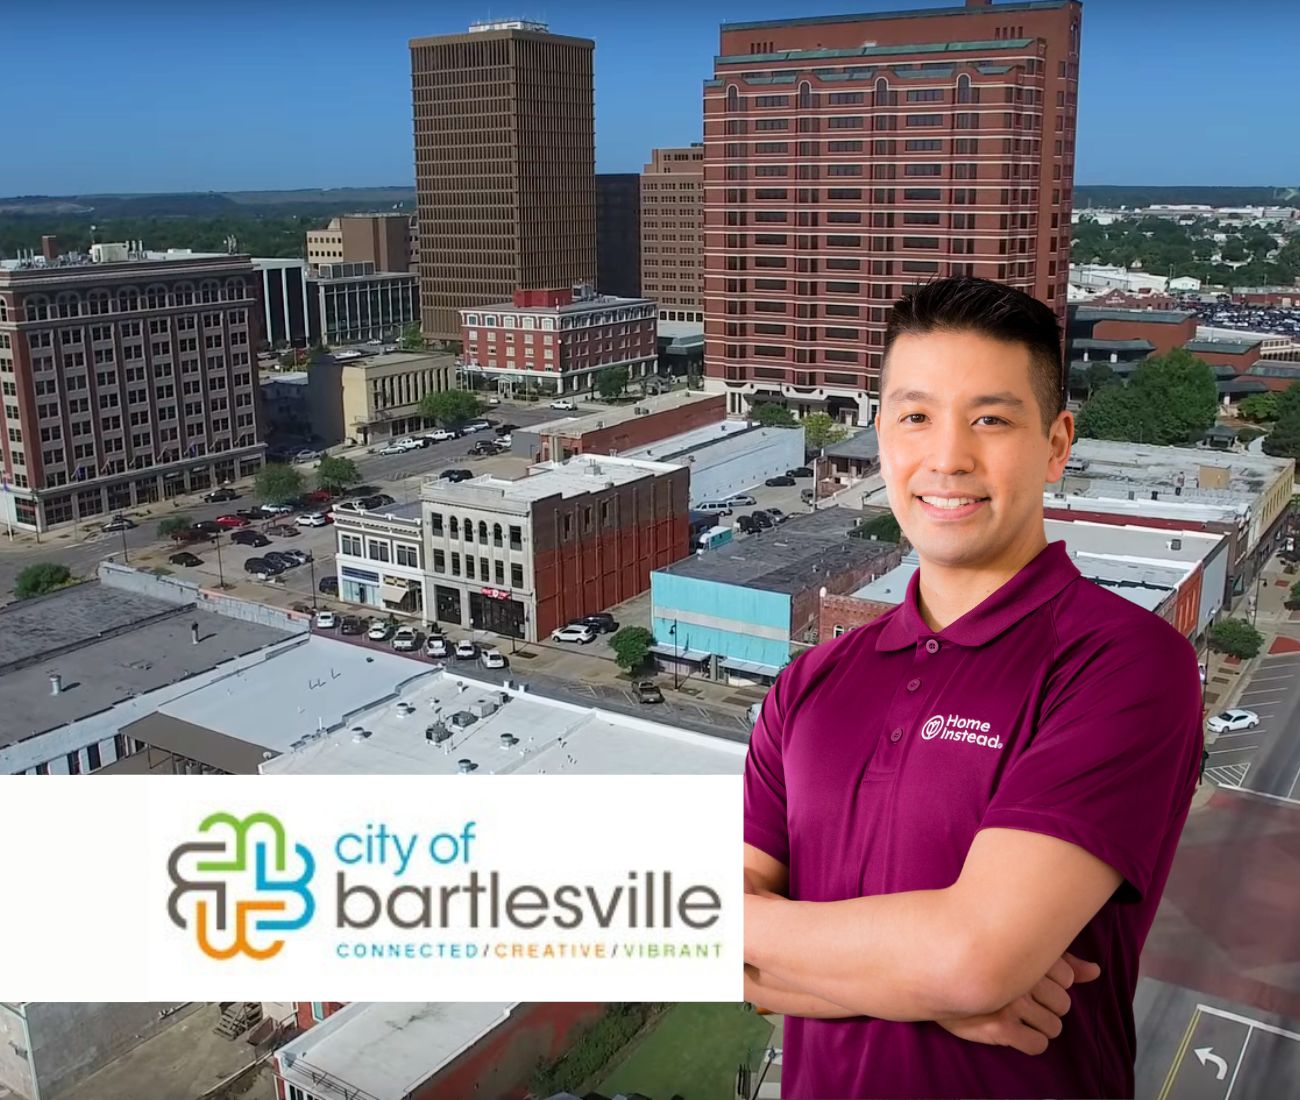 Home Instead caregiver with Bartlesville Oklahoma in the background